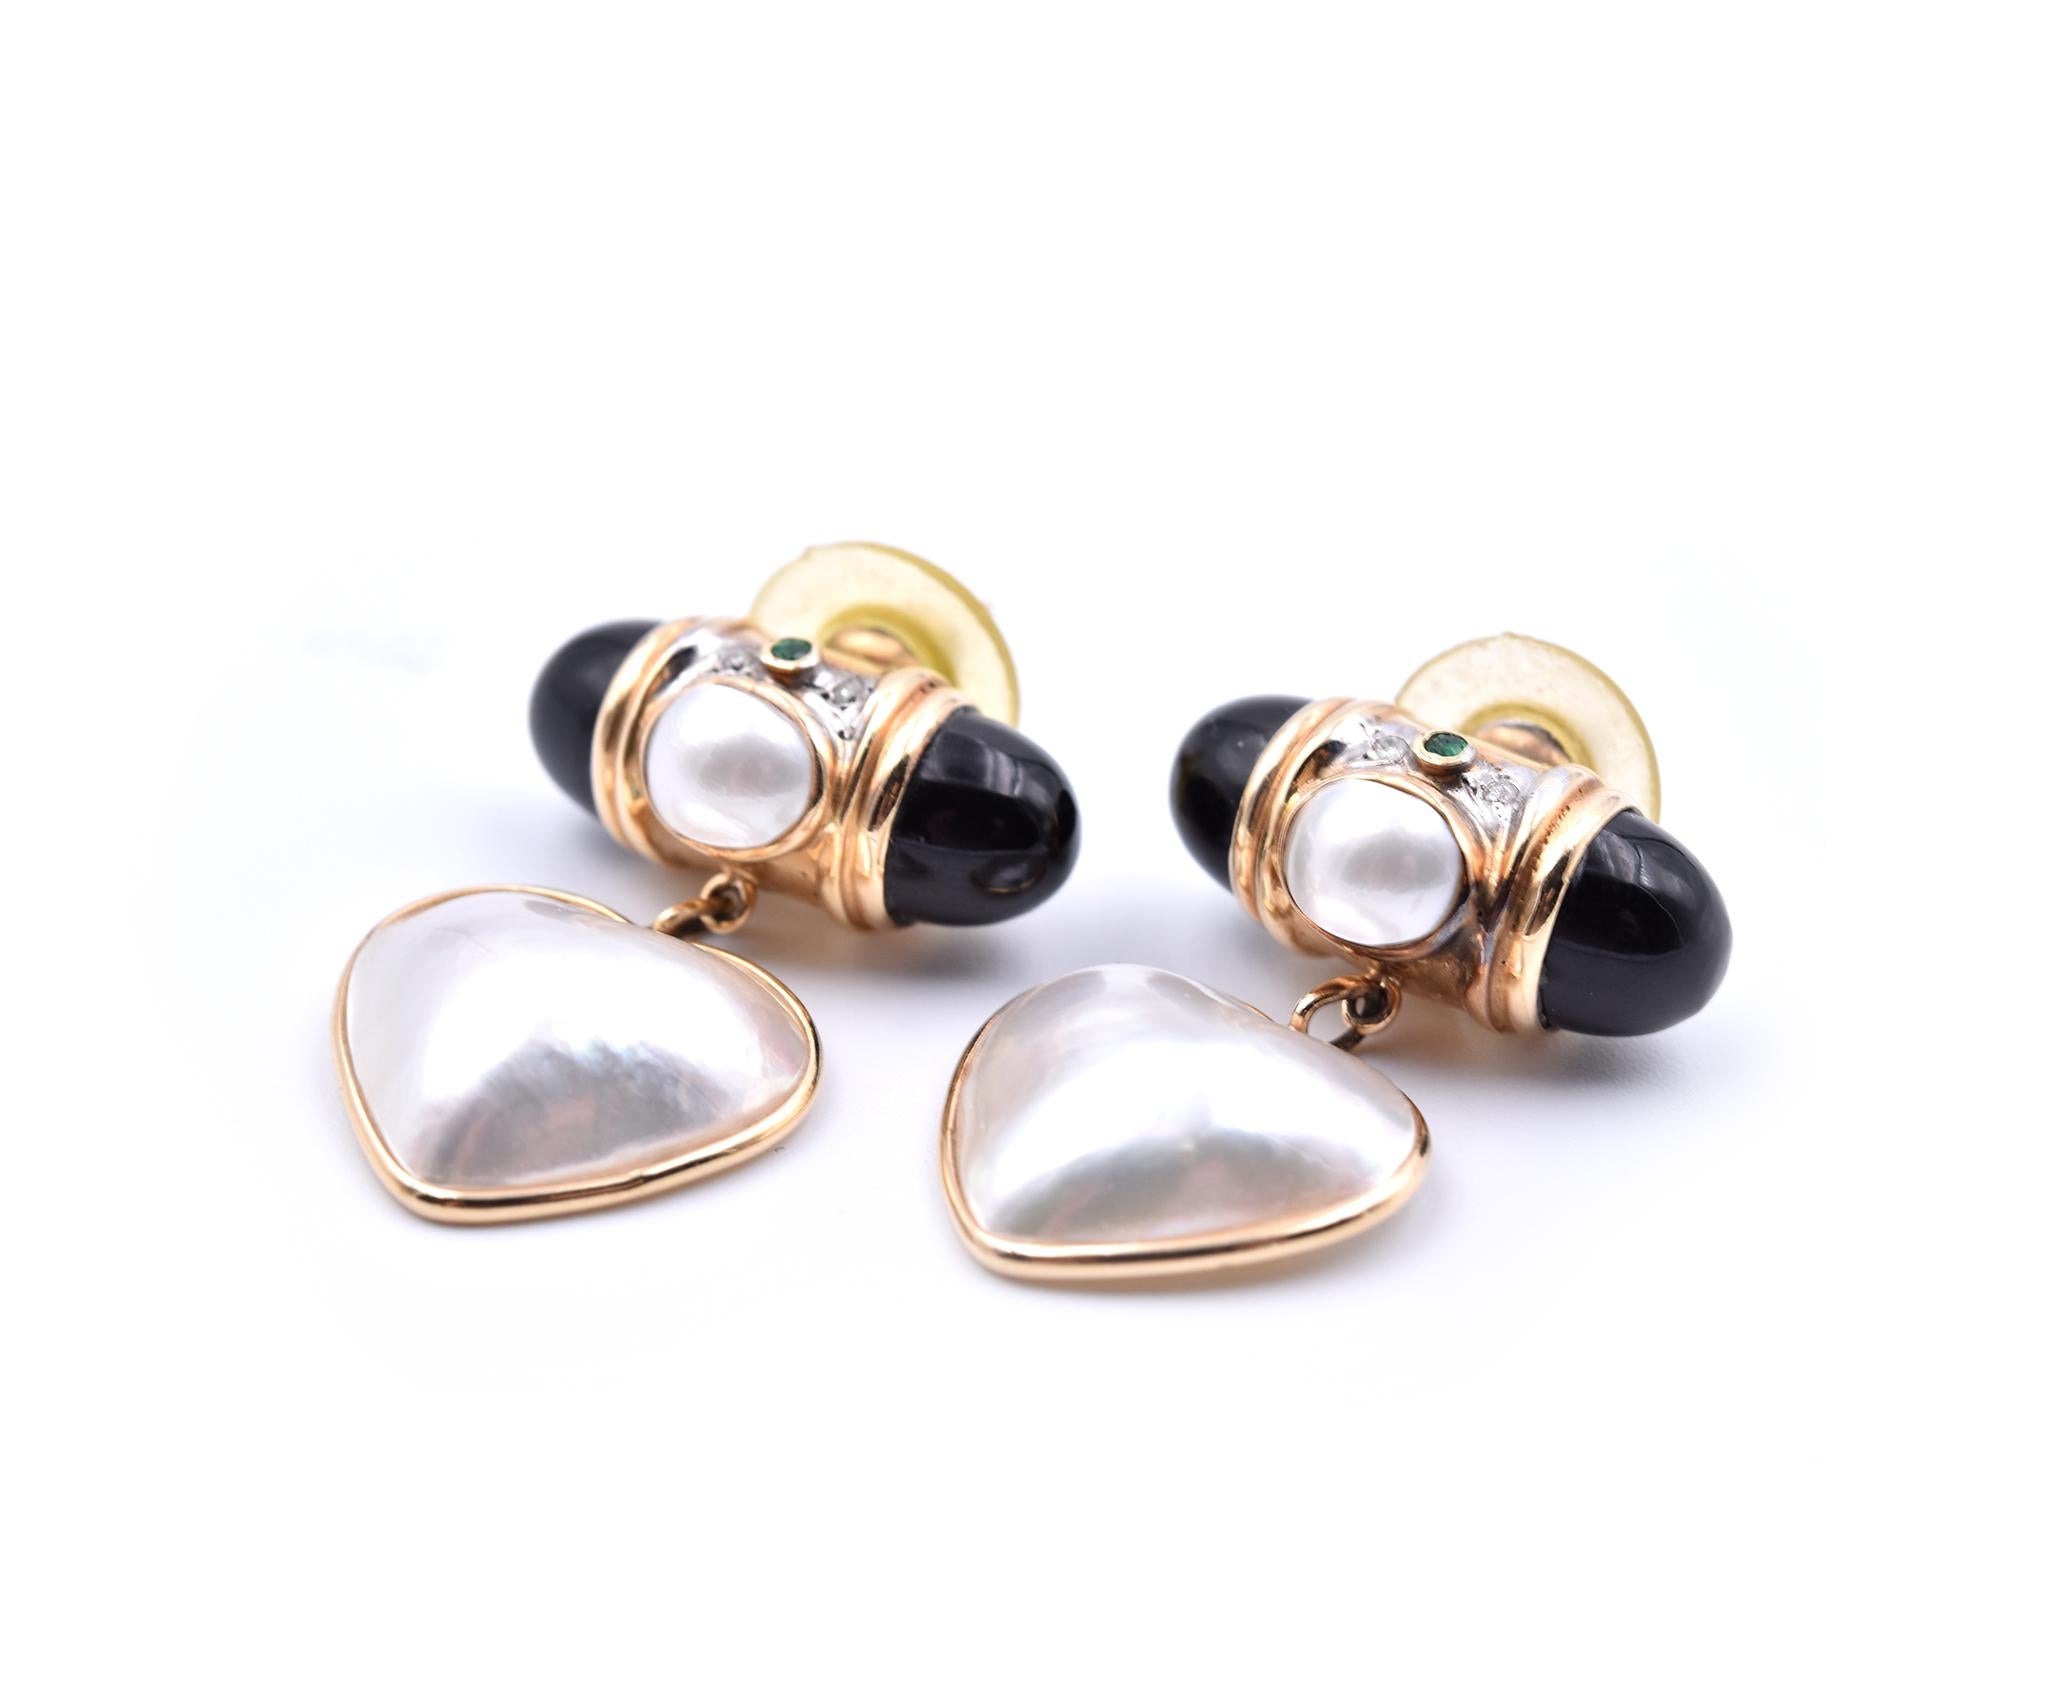 14 Karat Yellow Gold Mabe Pearl Earrings with Onyx, Emerald, and Diamond In Excellent Condition For Sale In Scottsdale, AZ